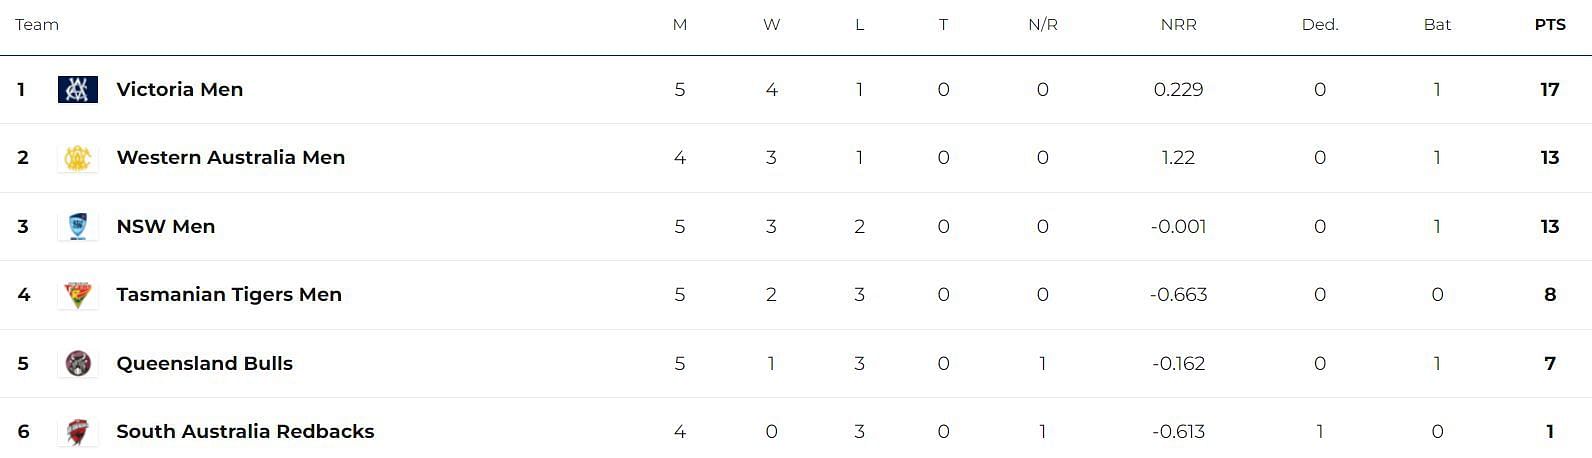 Marsh One Day Cup 2023-24 Points Table (PC: https://www.cricket.com.au/)